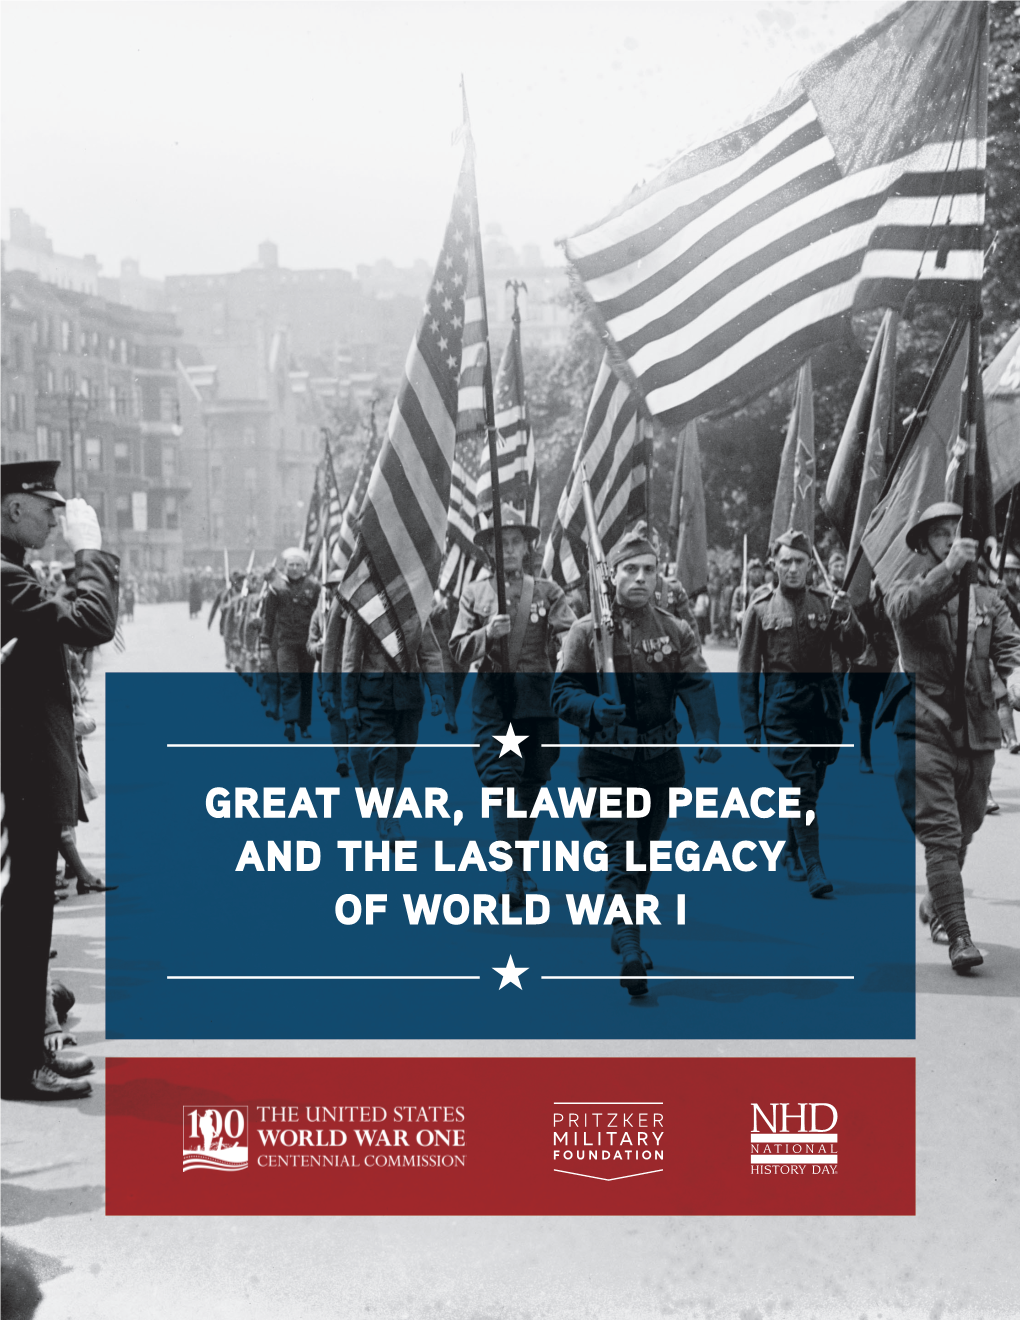 Great War, Flawed Peace, and the Lasting Legacy of World War I